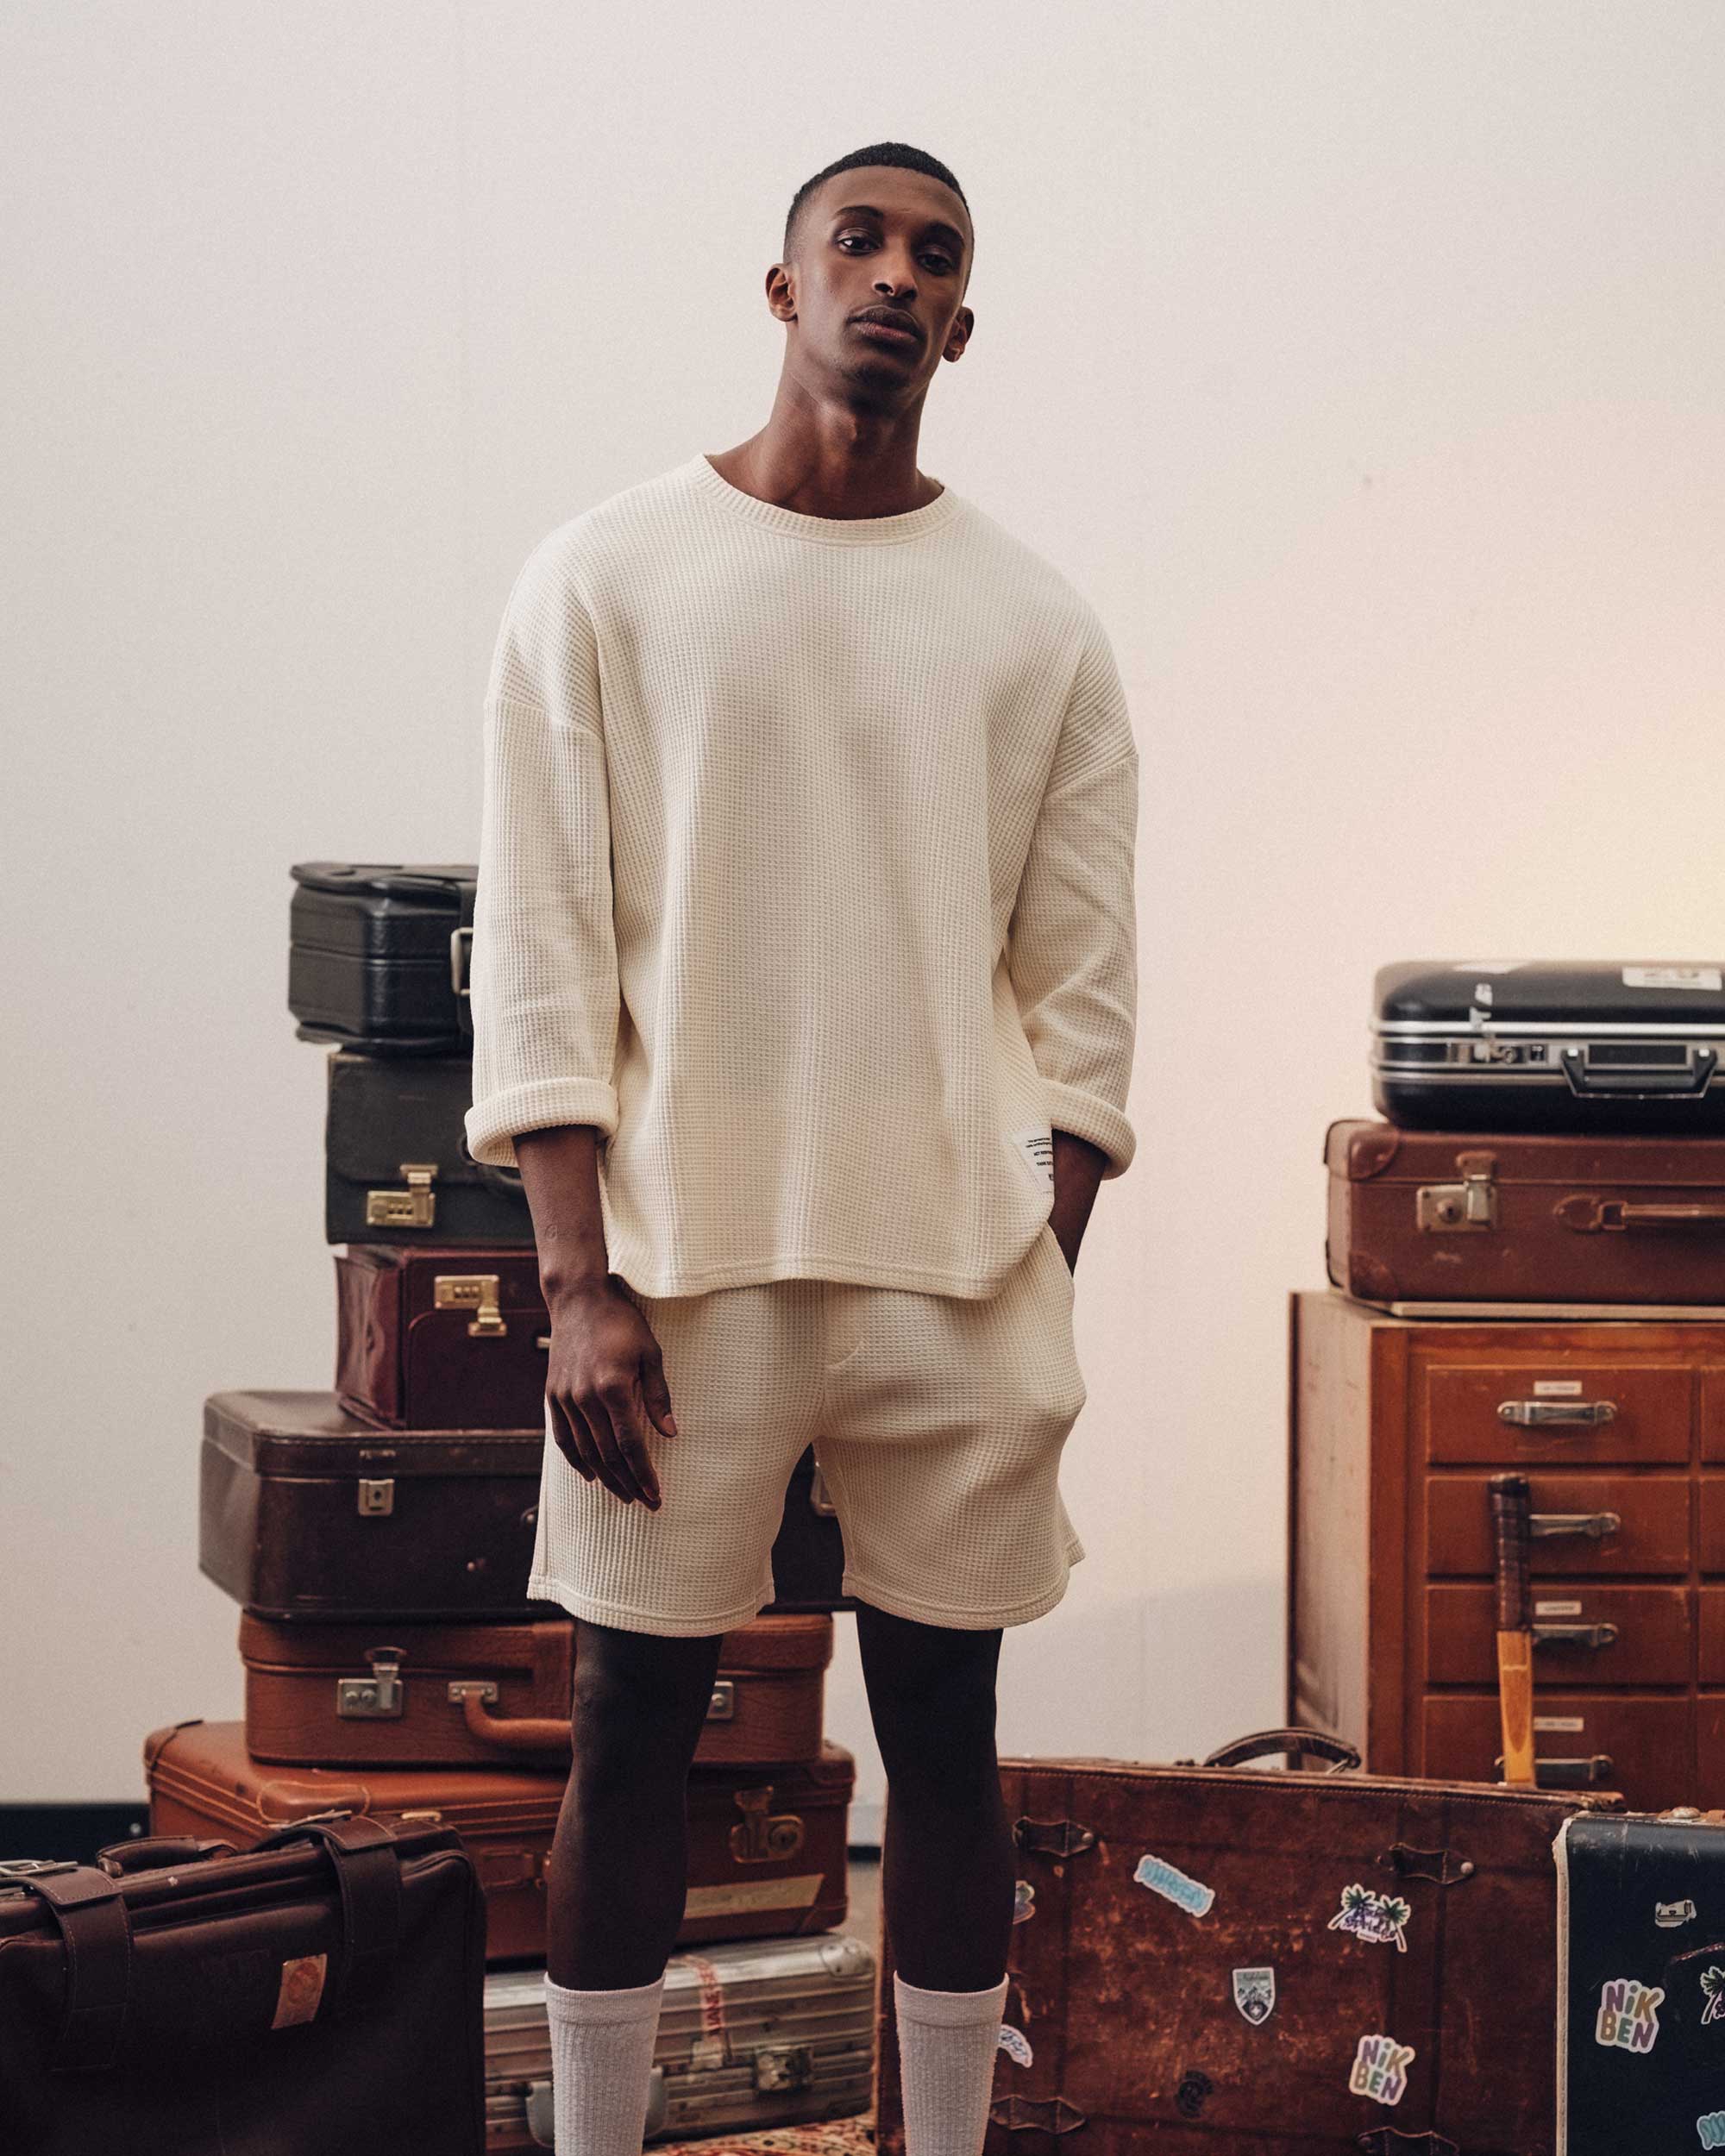 Male model wearing an off-white waffle-patterned sweatshirt with a stitched-on material label.